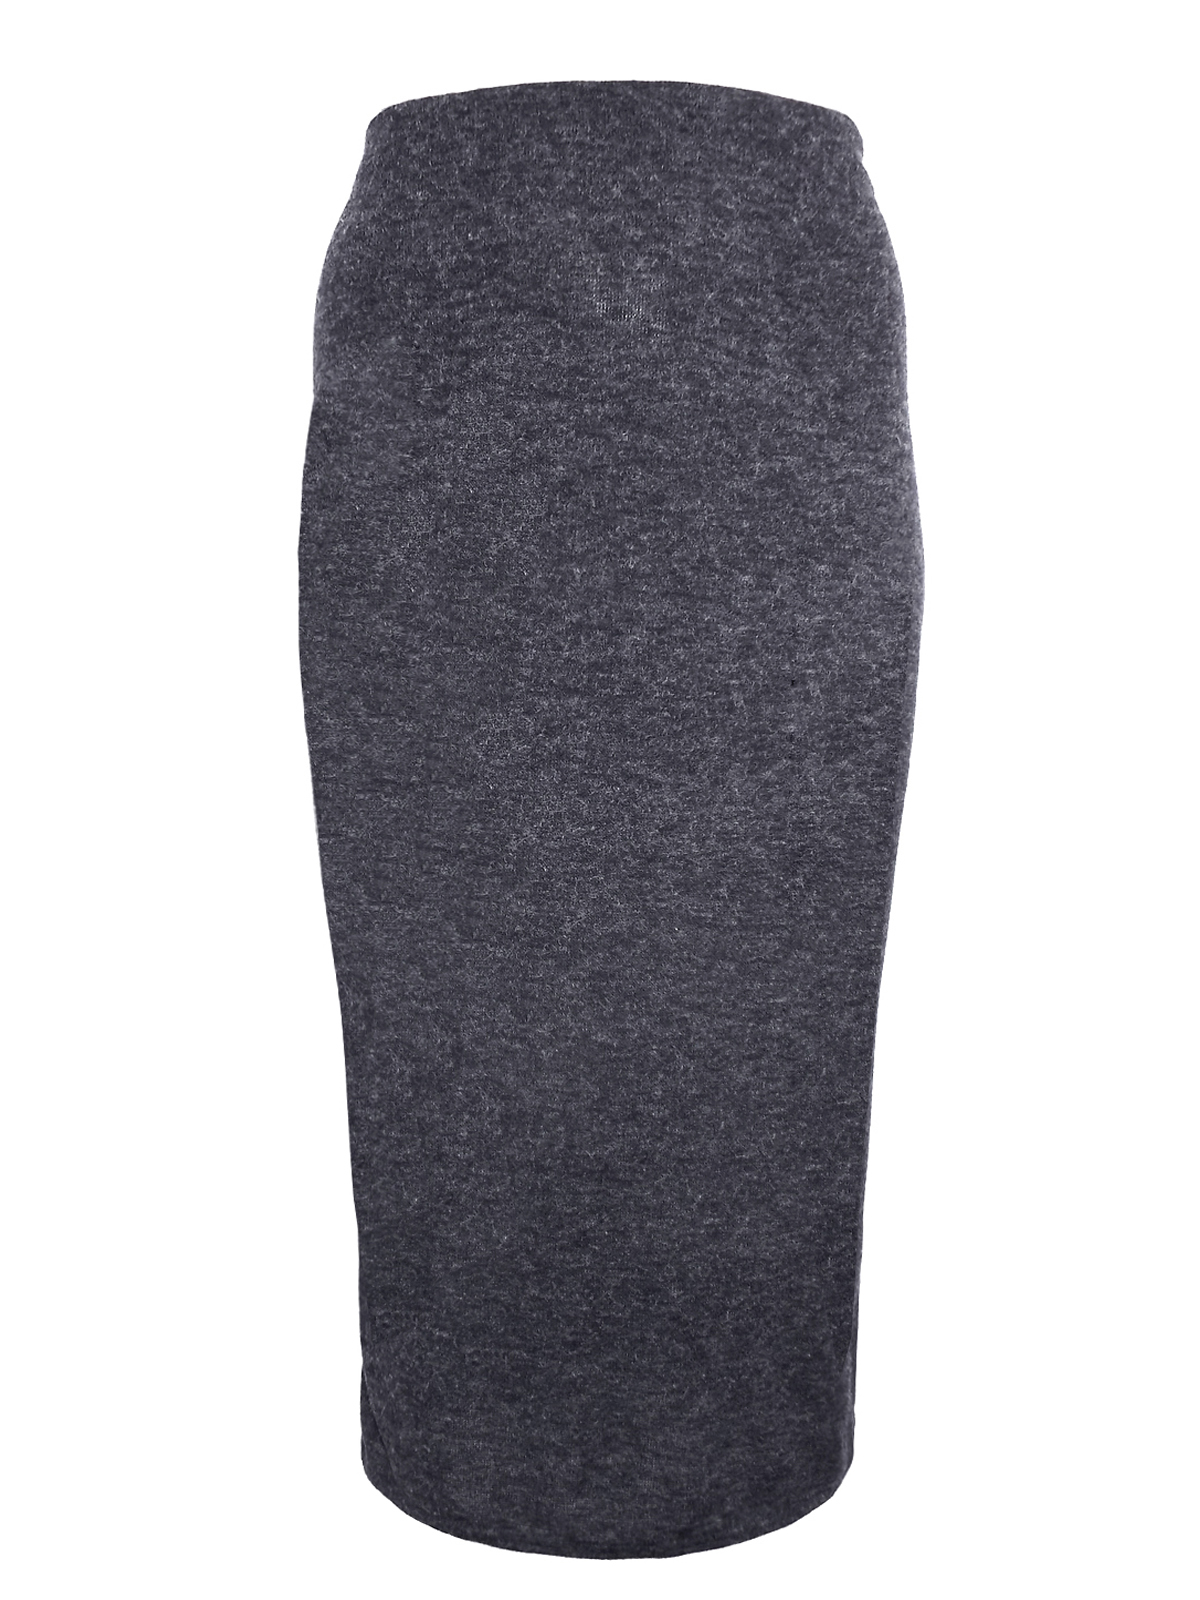 Edit - - Cruve CHARCOAL Marl Long Skirt - Plus Size 18 to 30/32